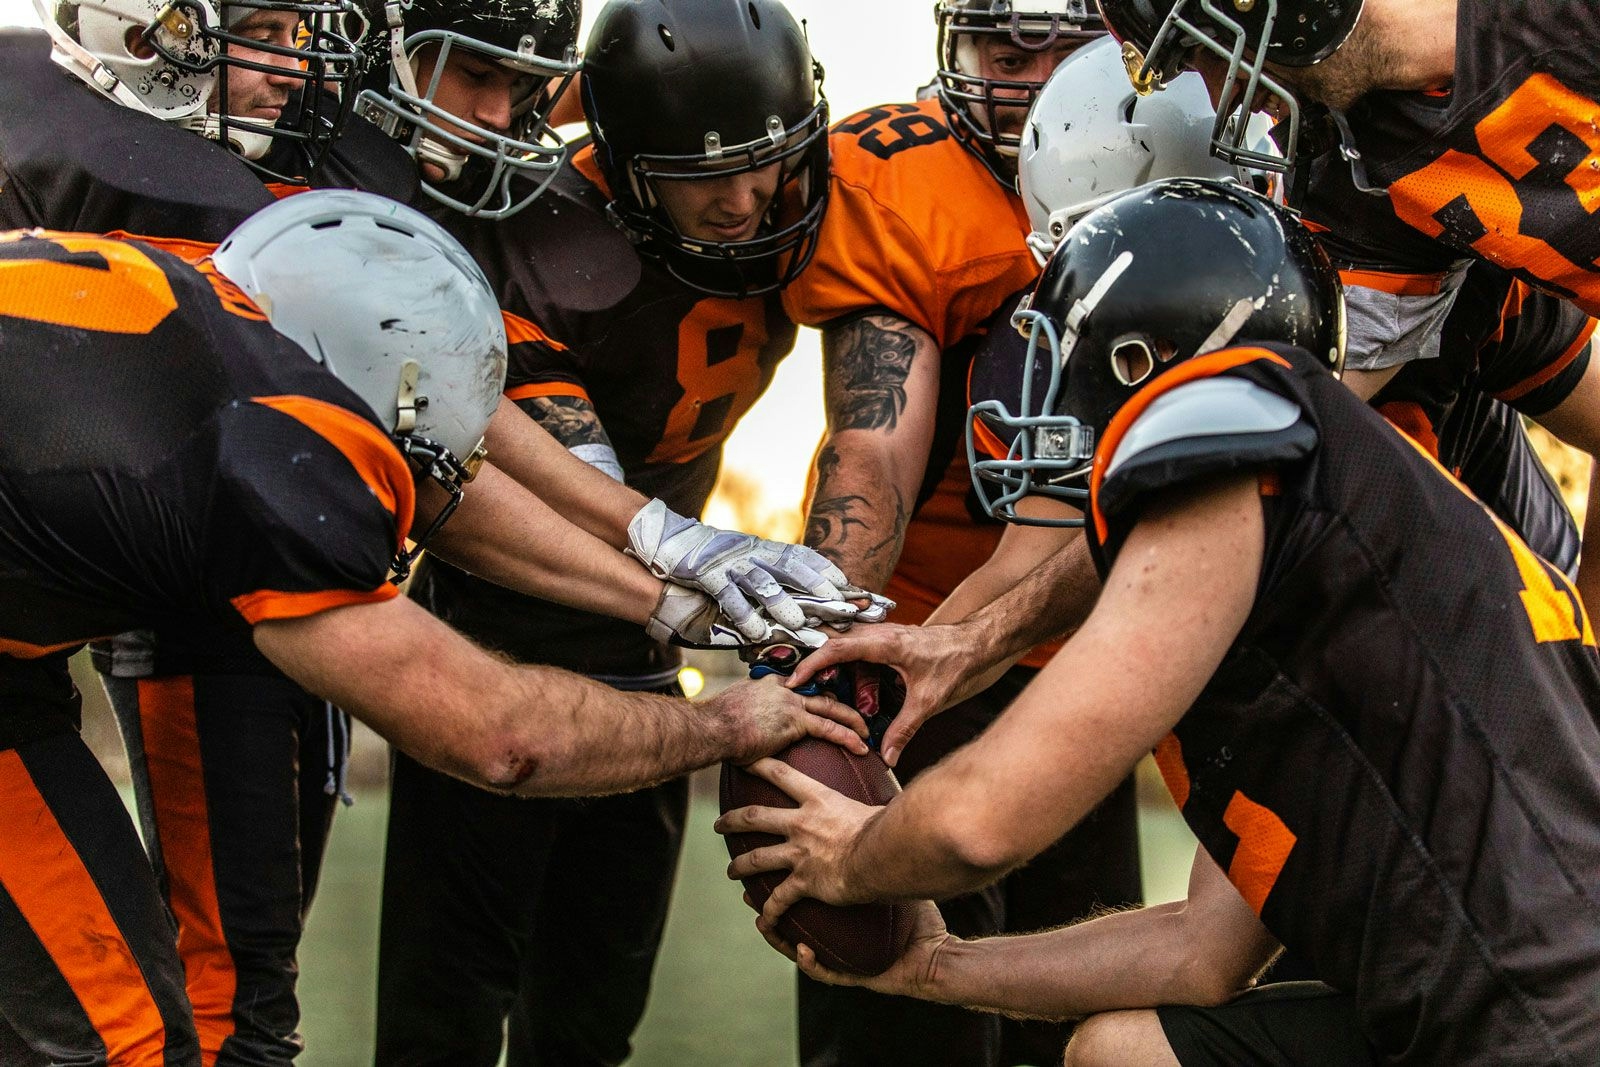 An American football team gather up and touch the ball before a match